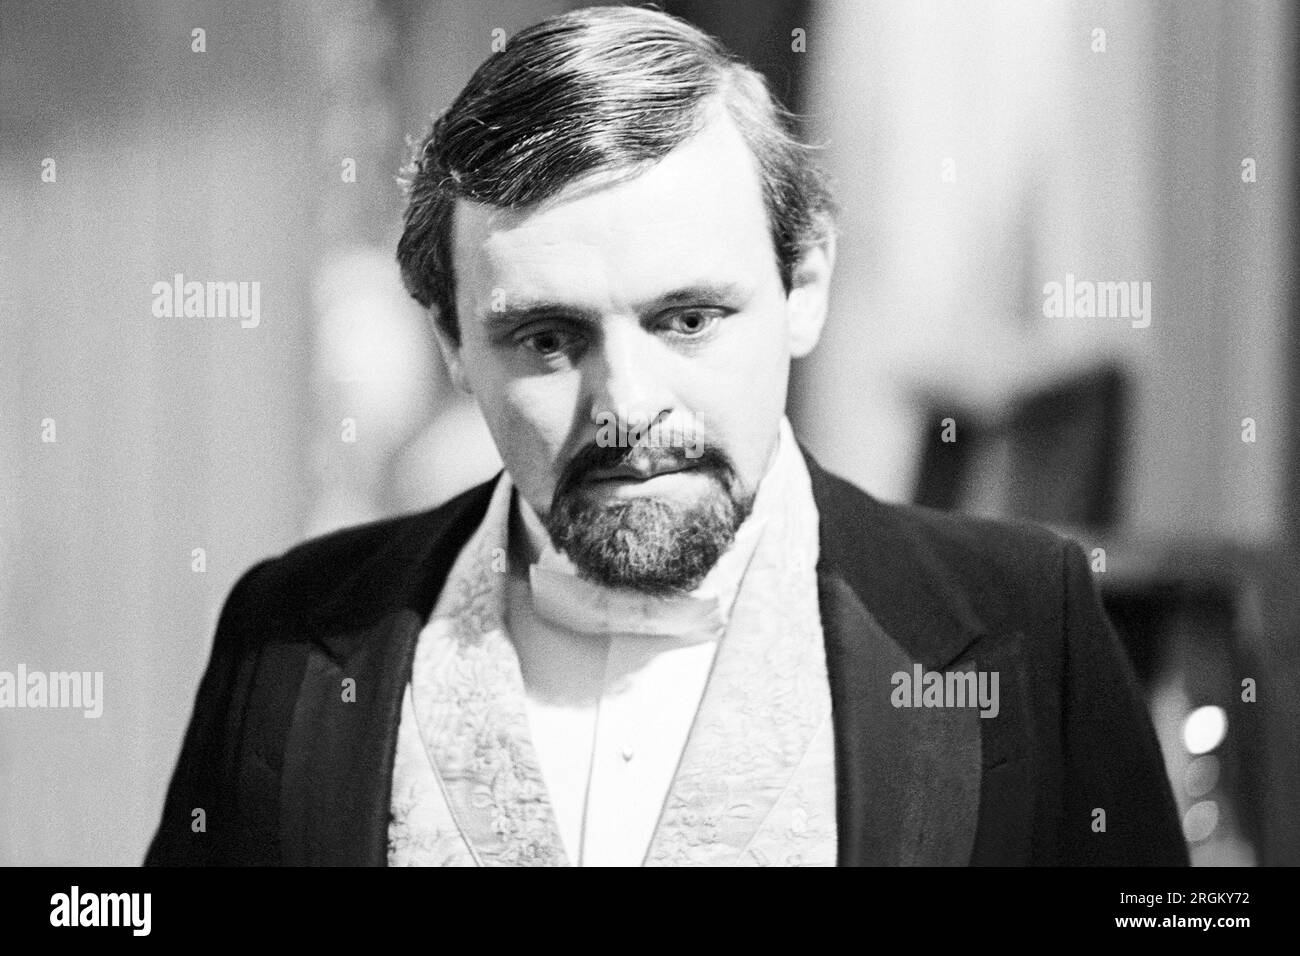 Anthony Hopkins (playing Torvald Helmer) during a break in filming of the 1973 Hillard Elkins production of Ibsen’s A DOLL’S HOUSE directed by Patrick Garland at Elstree Studios, Hertfordshire, England. Stock Photo